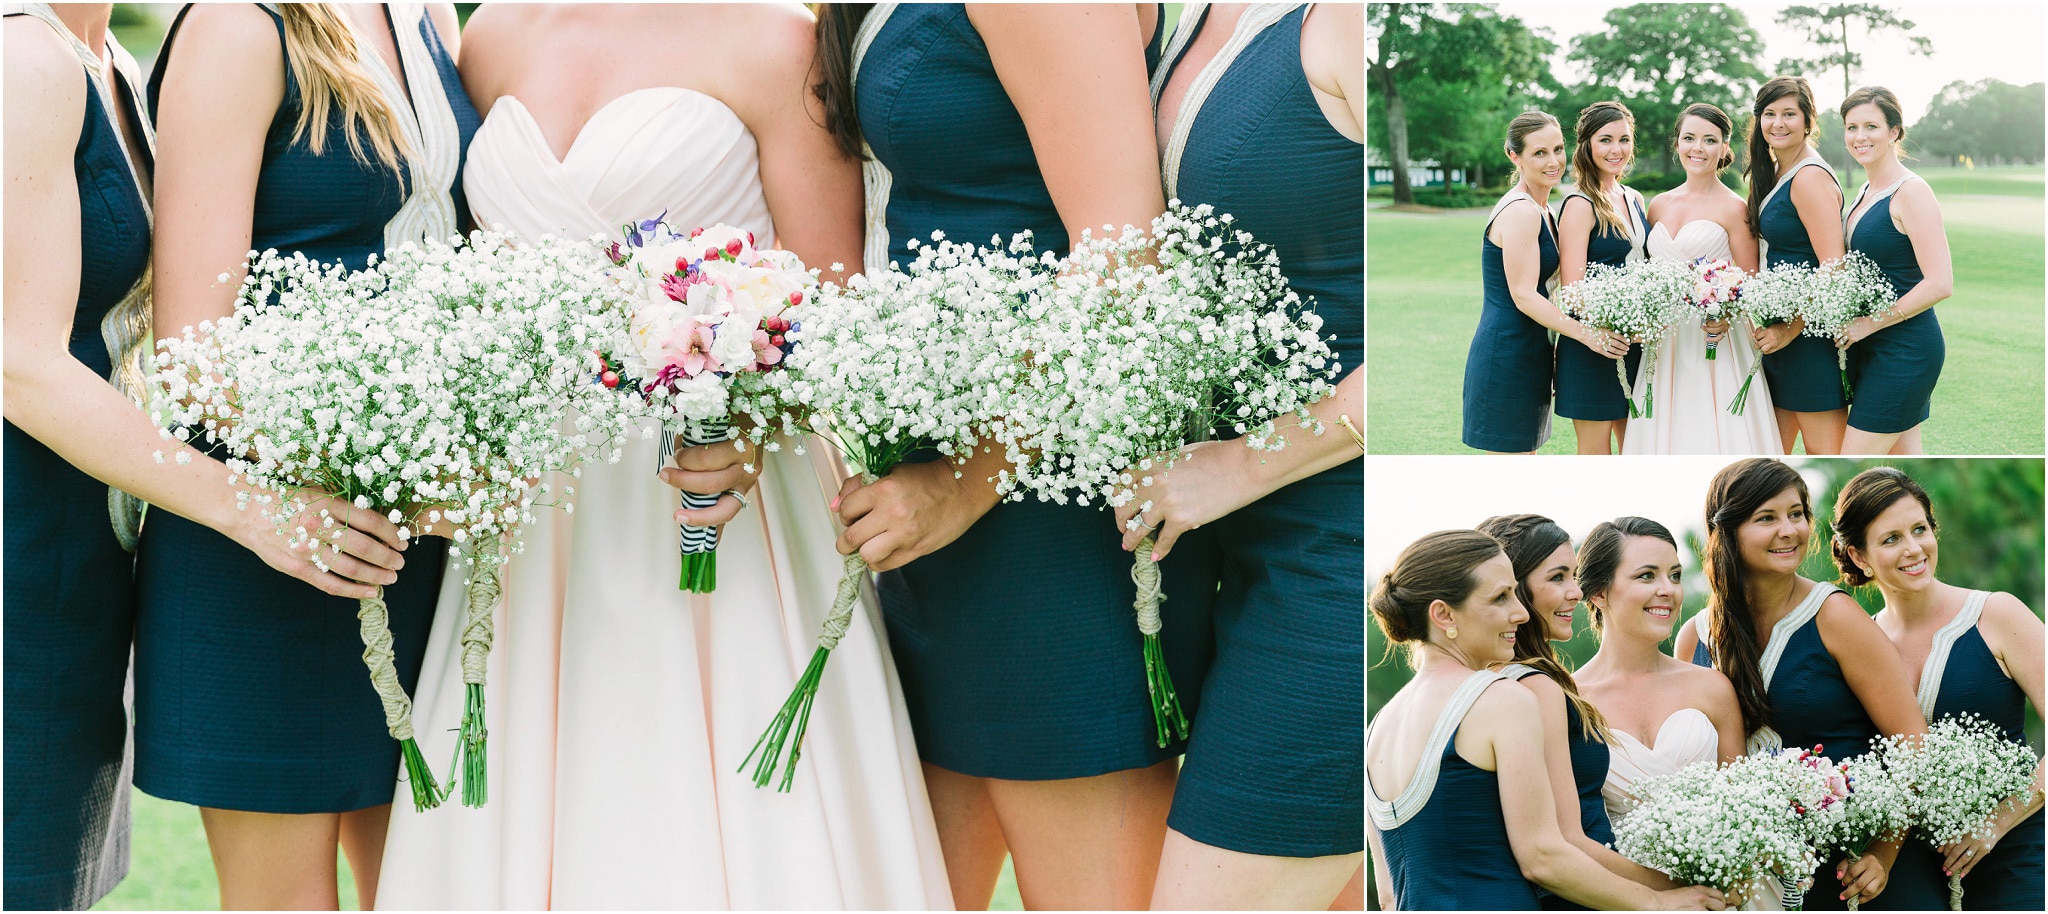 The Bride with her bridesmaids and the bouquets of flowers